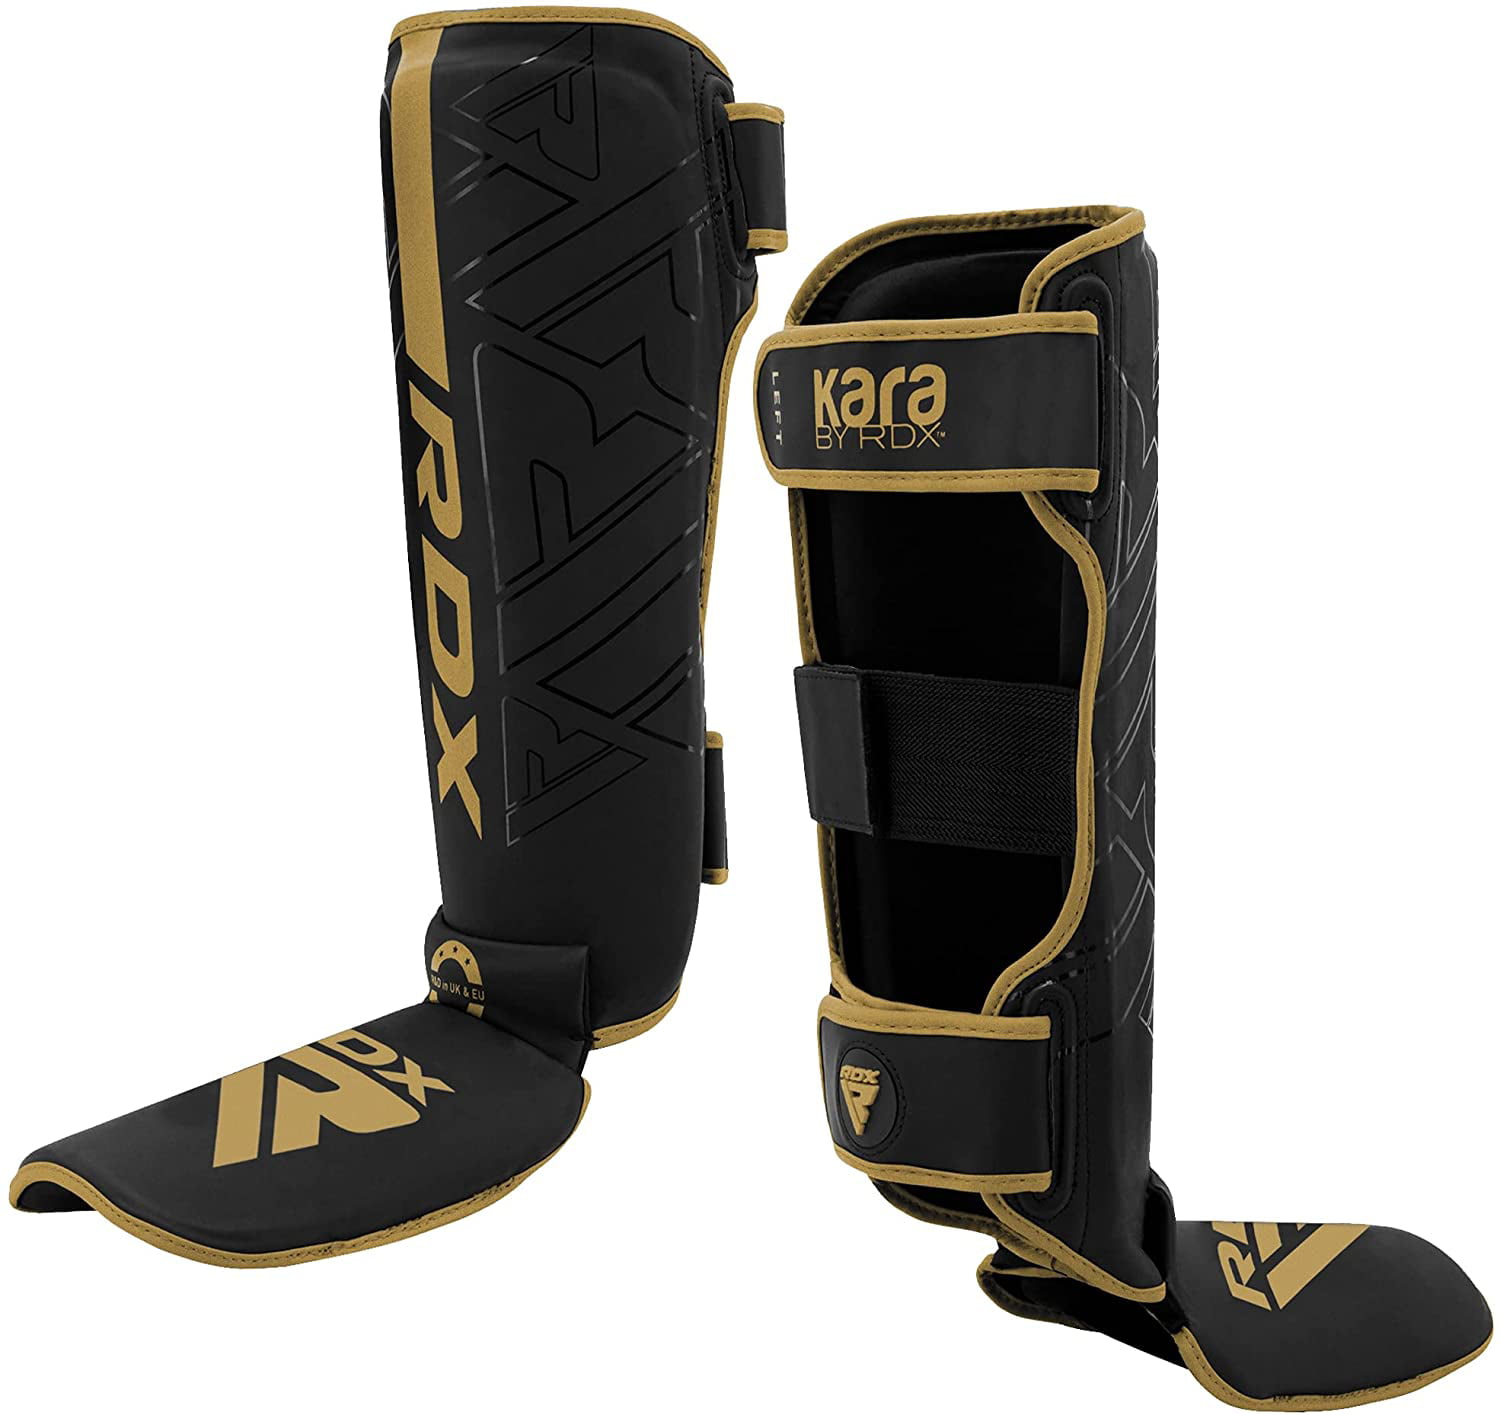 Muay Thai RDX Shin Guards for Kickboxing Sparring Maya Hide Leather Kara Instep Foam Protection BJJ and Boxing Gear MMA Fighting and Training Pads Leg Foot Protector for Martial Arts